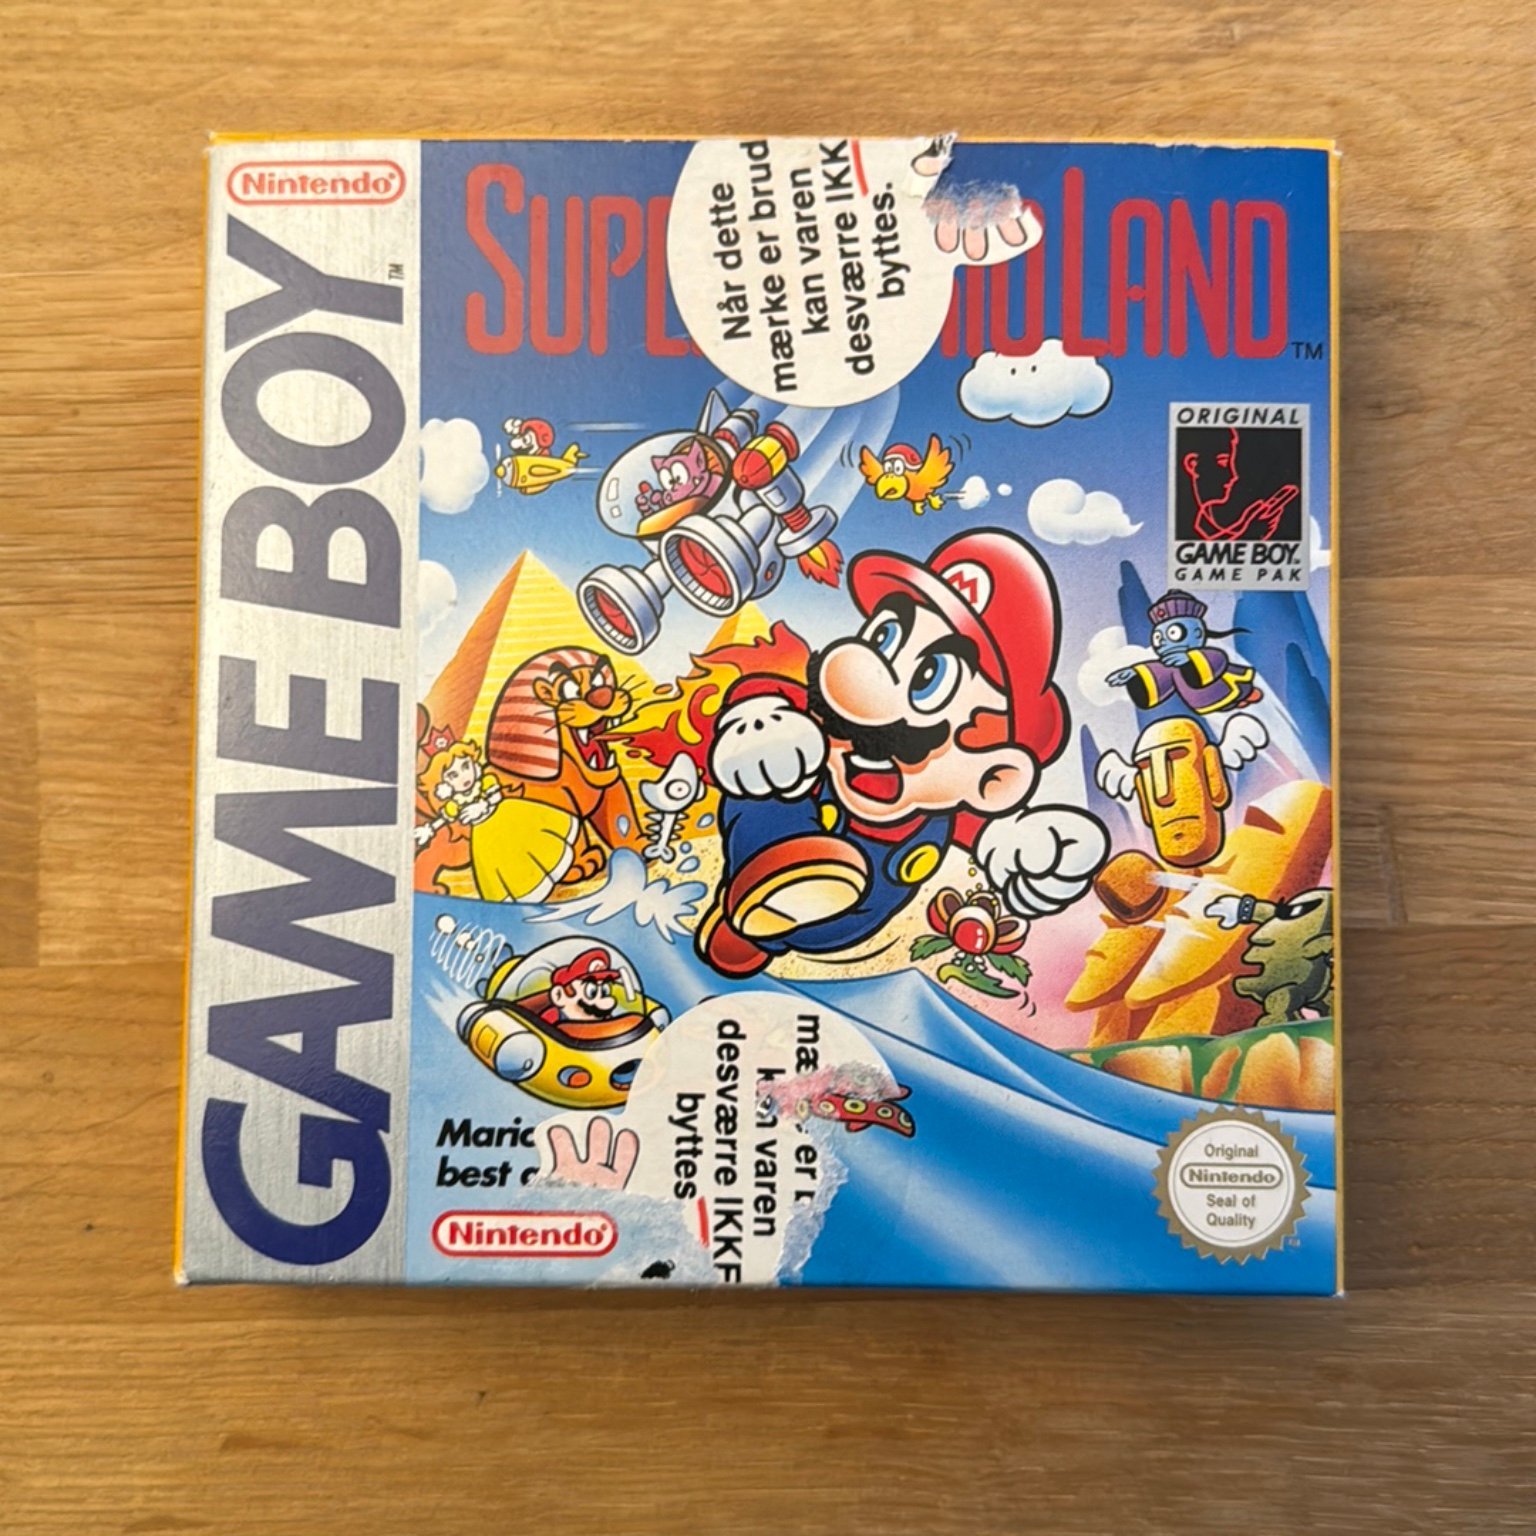 A copy of Super Mario Land with large stickers in norwegian or danish stating that the item cannot be returned if the seal is broken